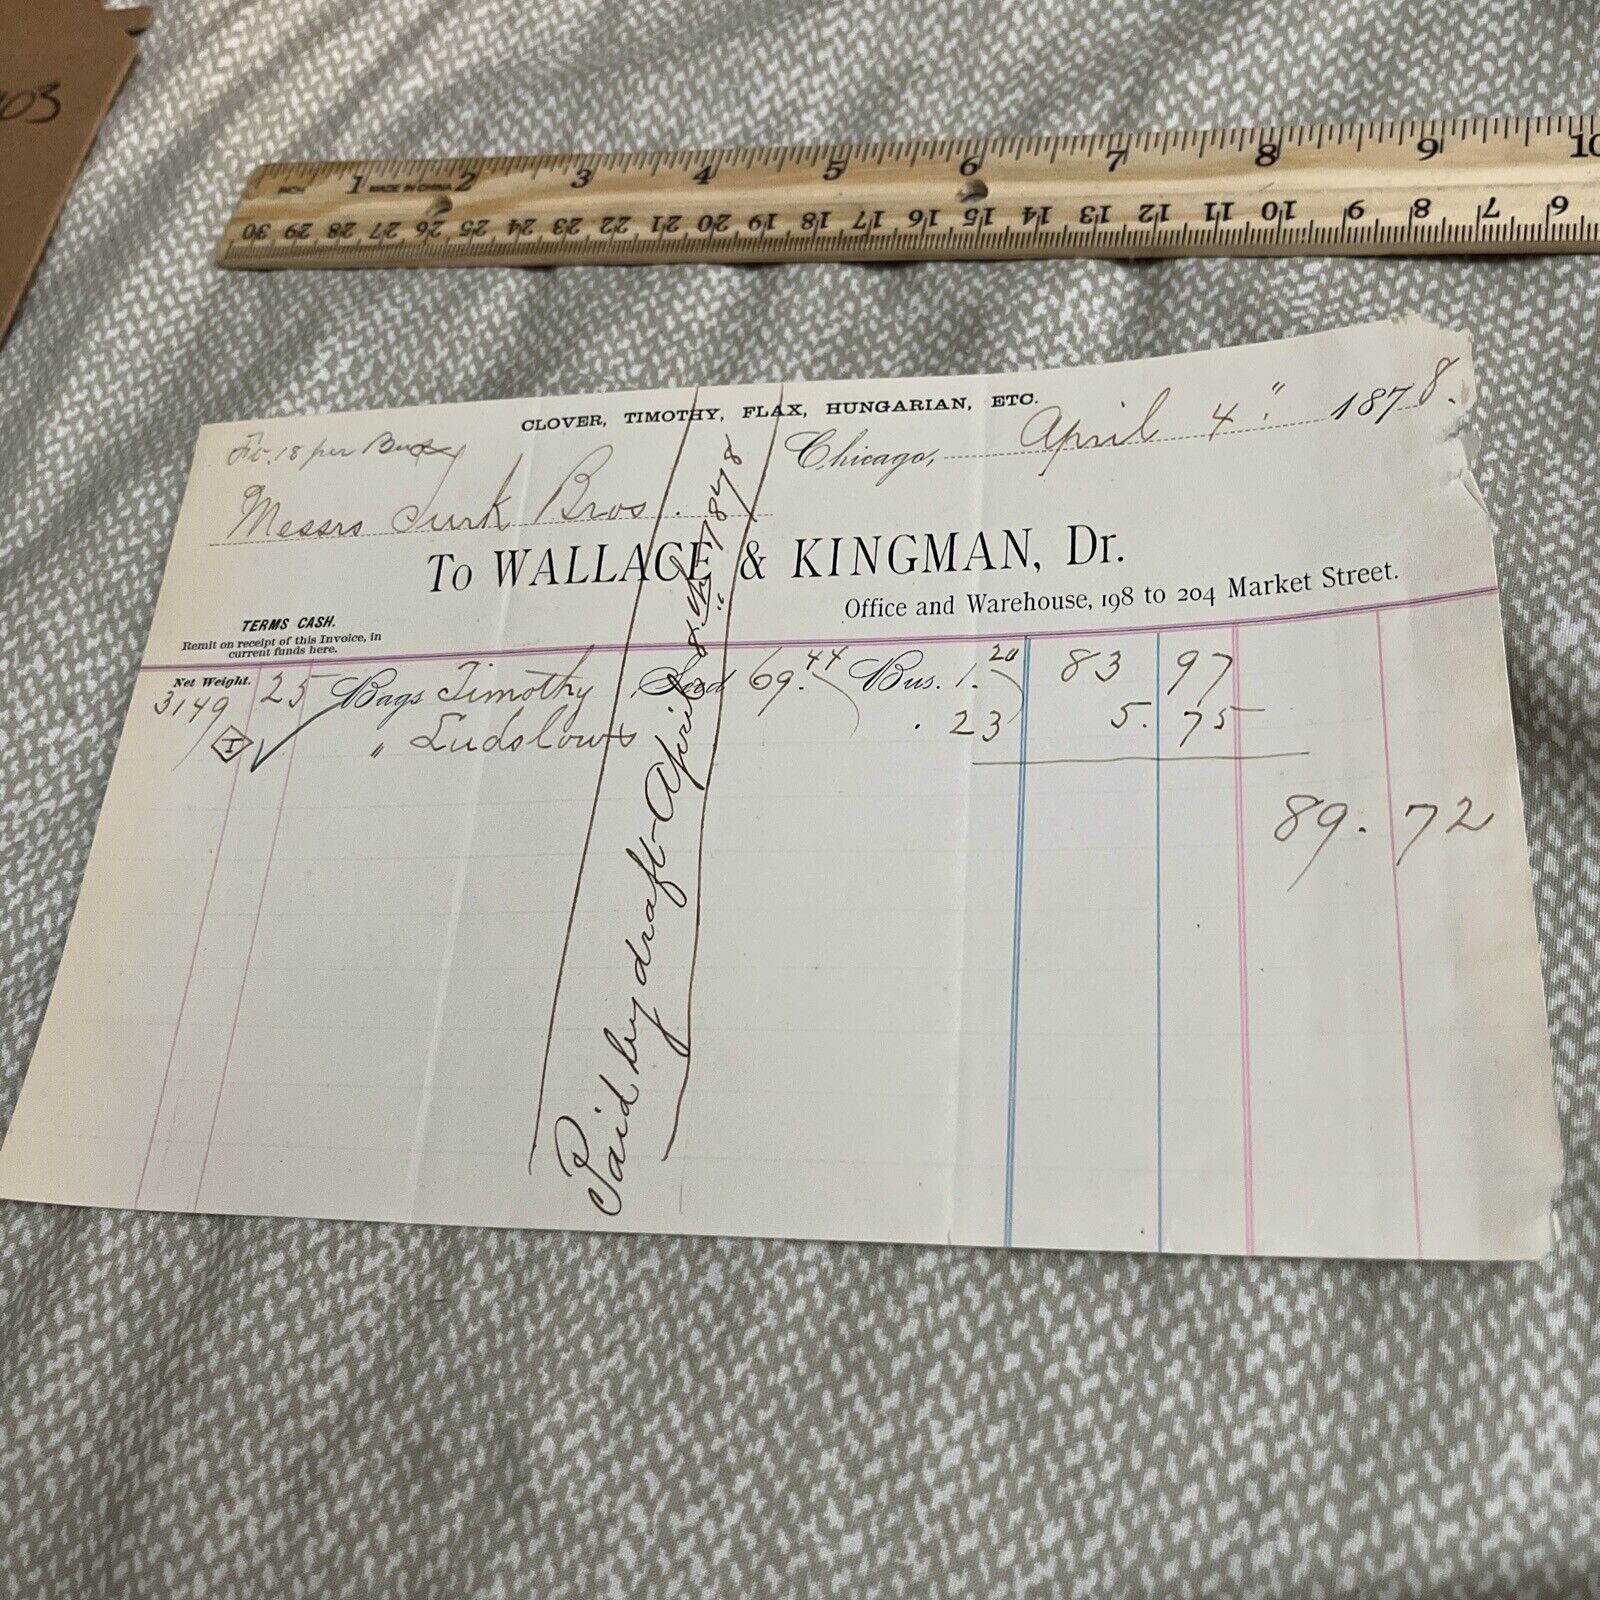 1878 Chicago (Market St) Wallace & Kingman Invoice for 25 Bags of Timothy Seed